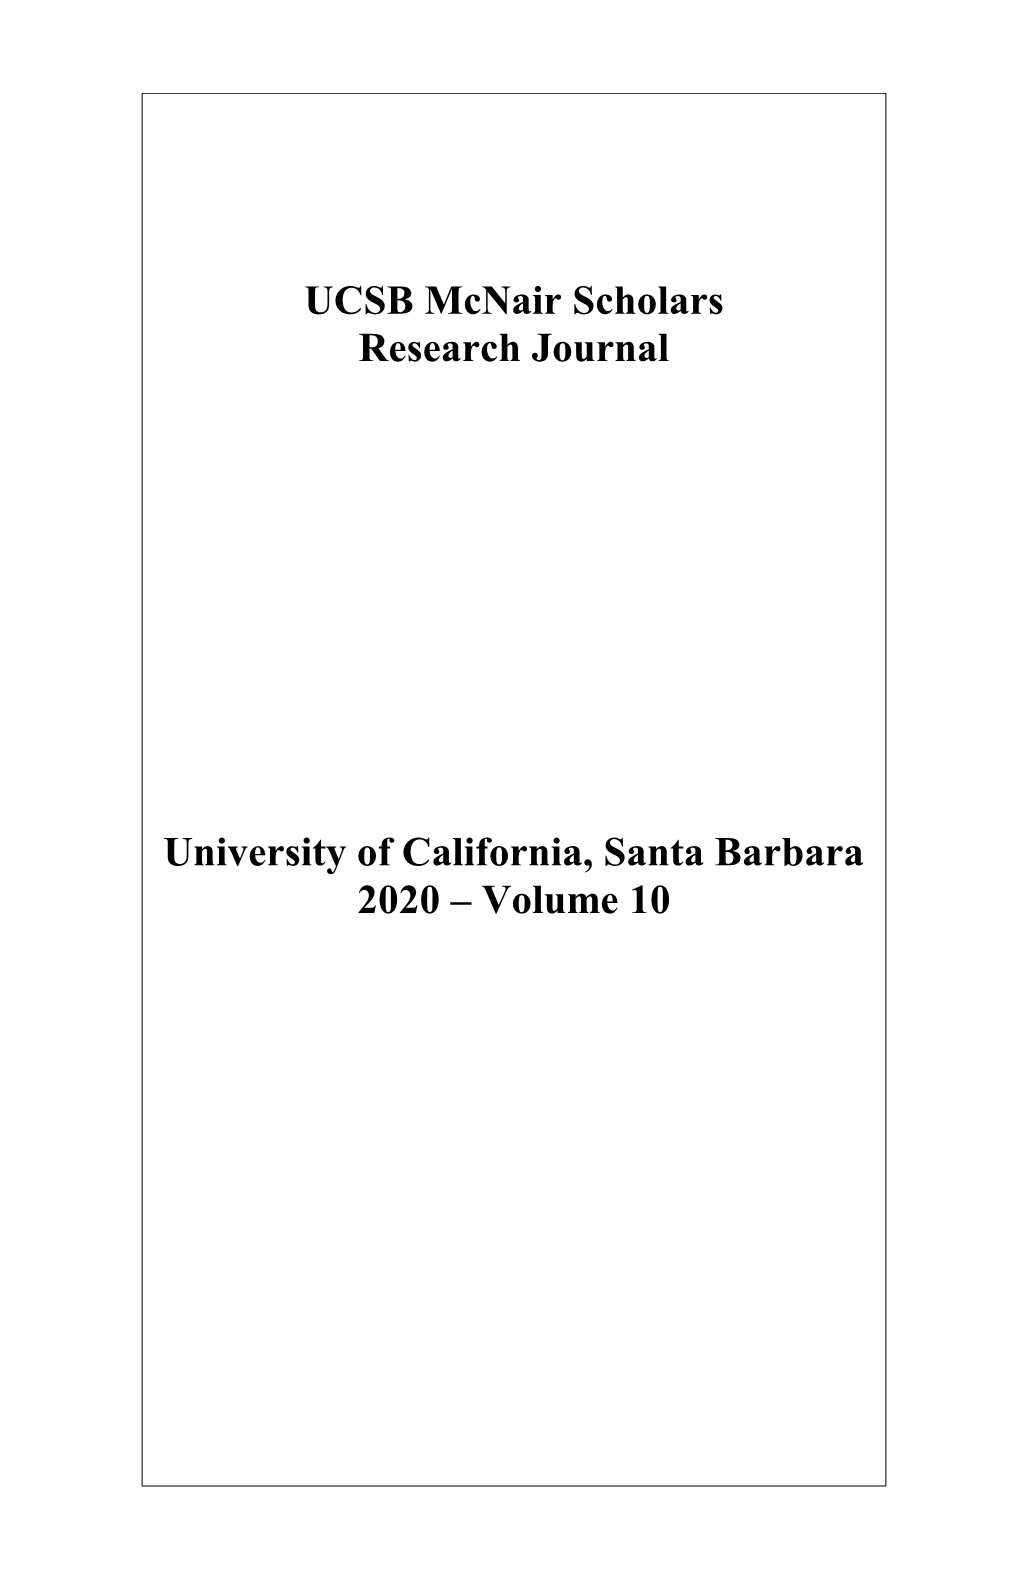 UCSB Mcnair Scholars Research Journal